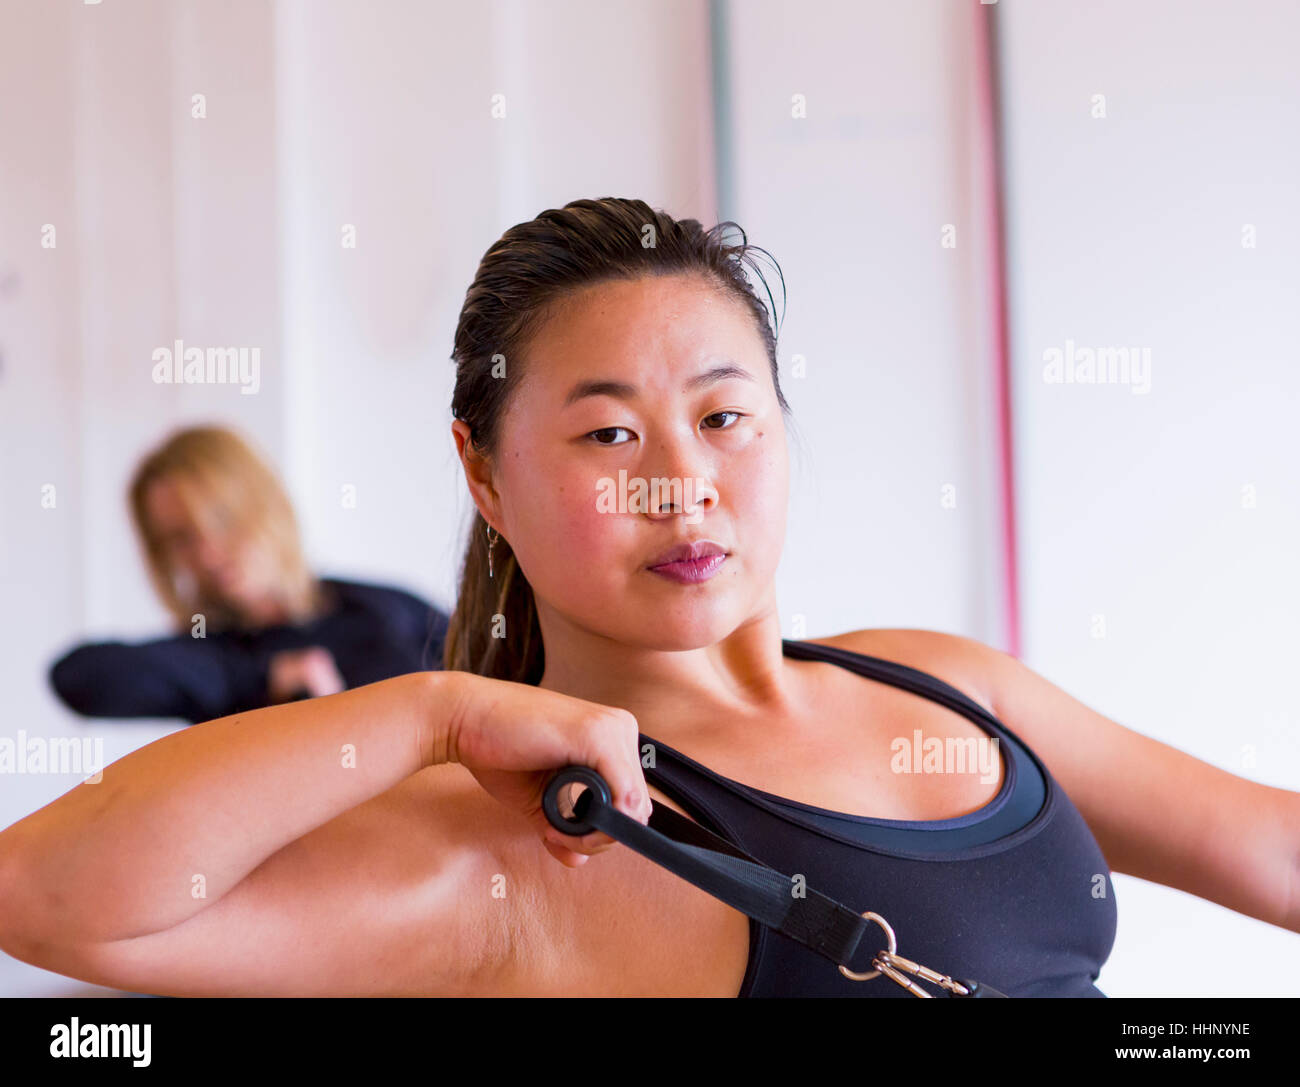 Portrait of Asian woman pulling handle in gymnasium Stock Photo